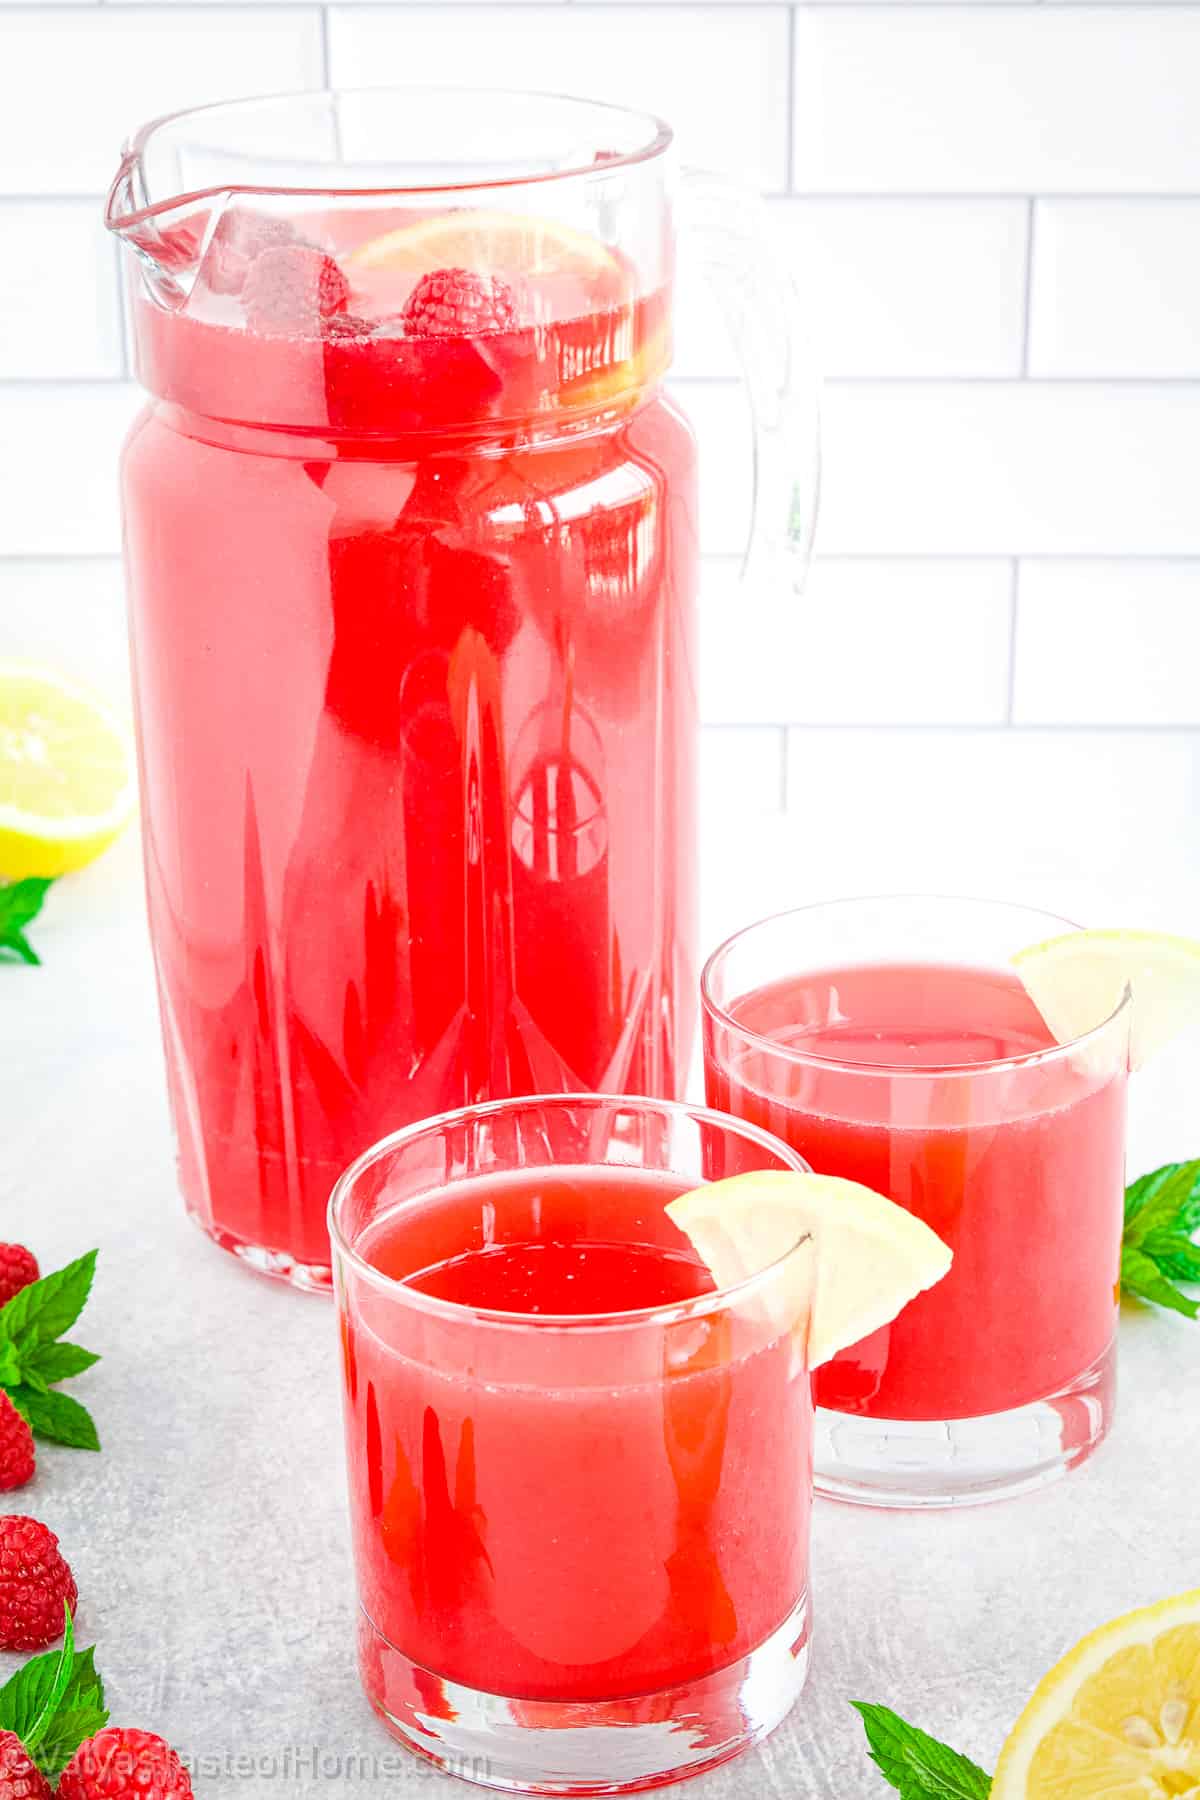 This fresh Raspberry Lemonade is the best way to enjoy the summer featuring the perfect balance of acidic lemons and juicy raspberries that taste delicious!